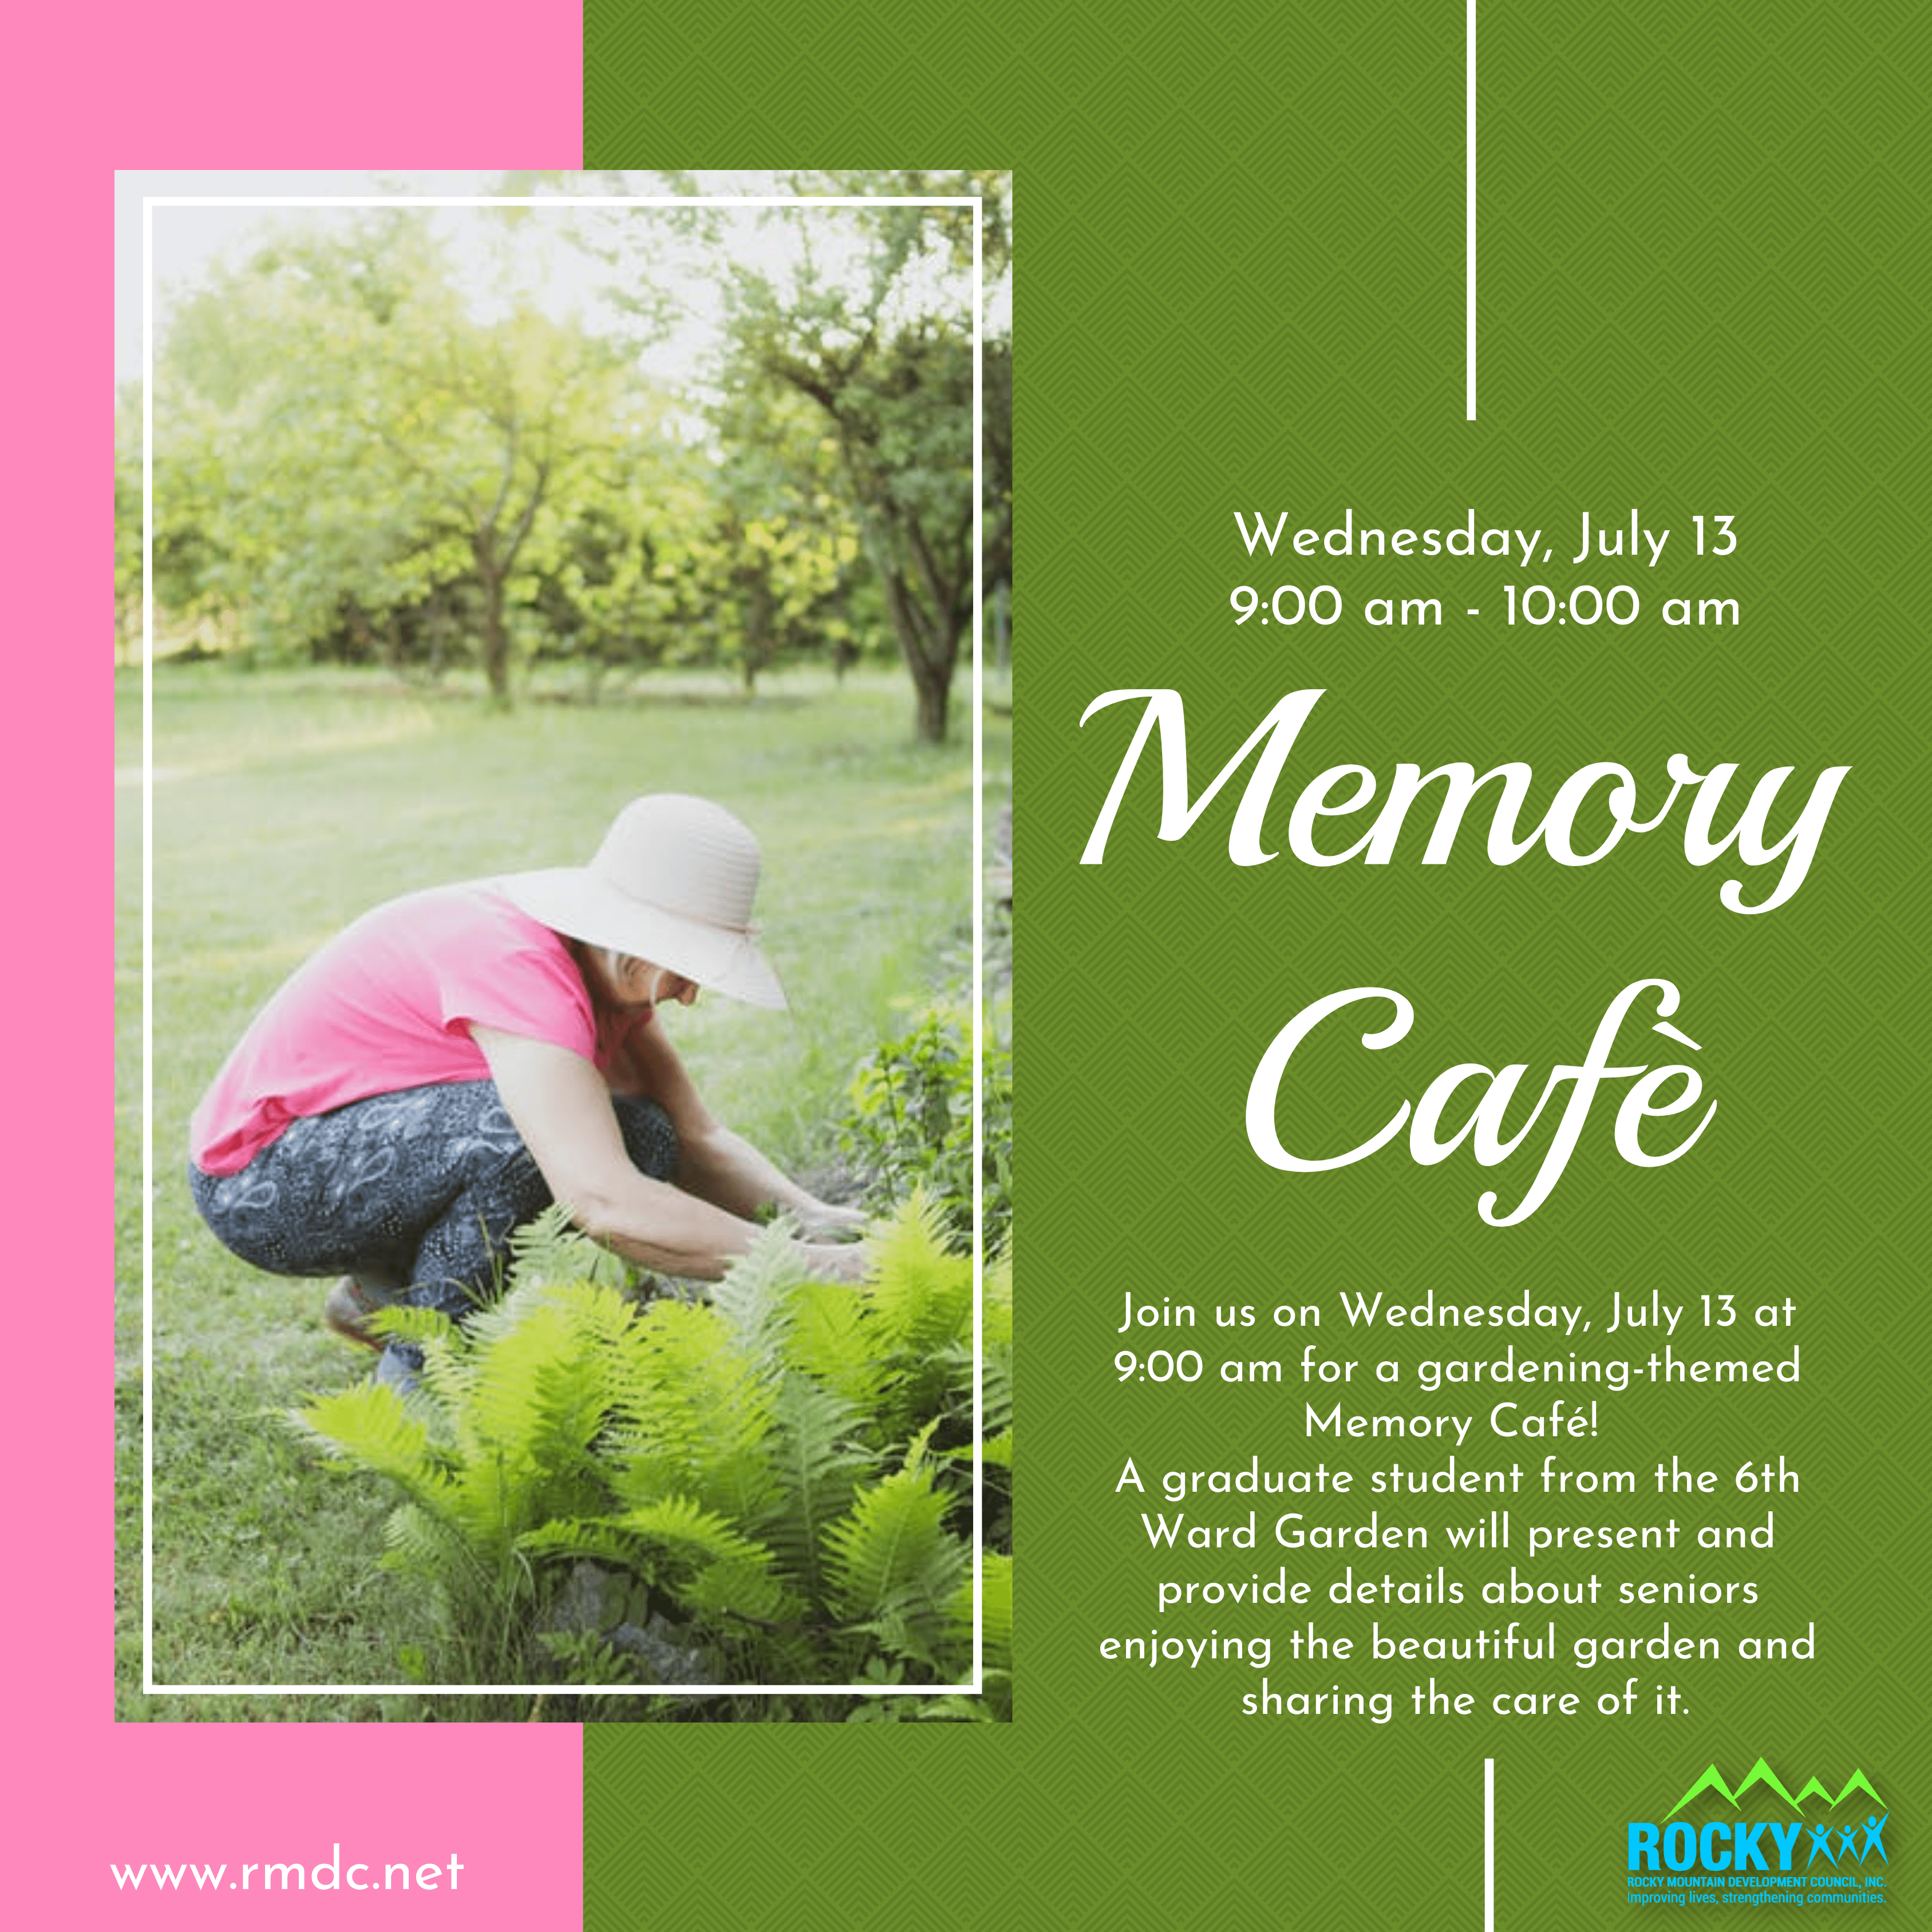 Join us on Wednesday, July 13 at 9:00 am for a gardening-themed Memory Café!  